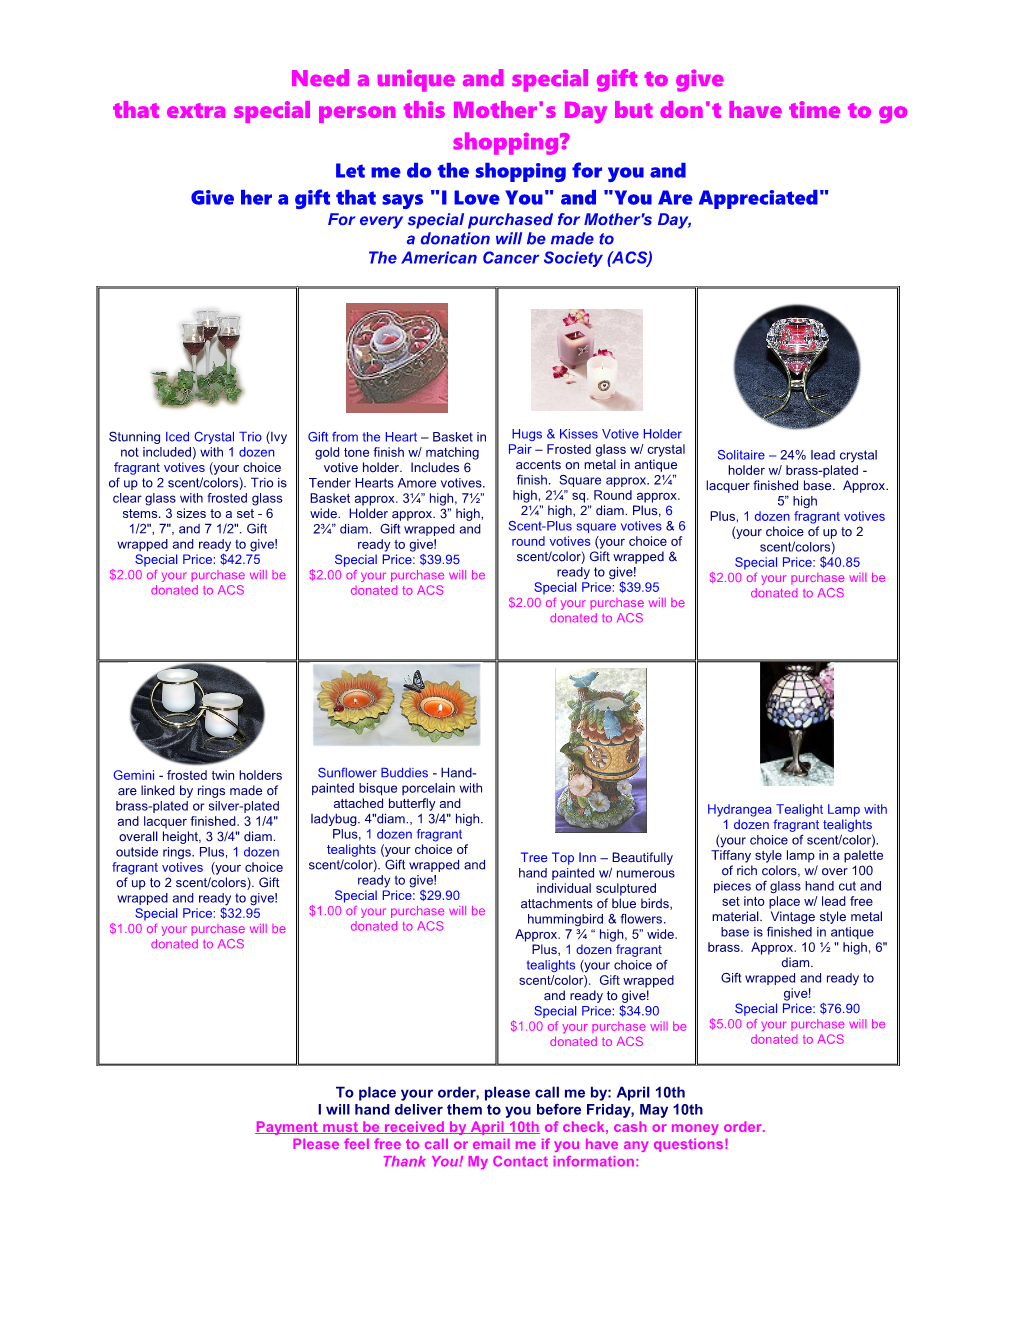 Mother's Day 2002 Gift Flyer